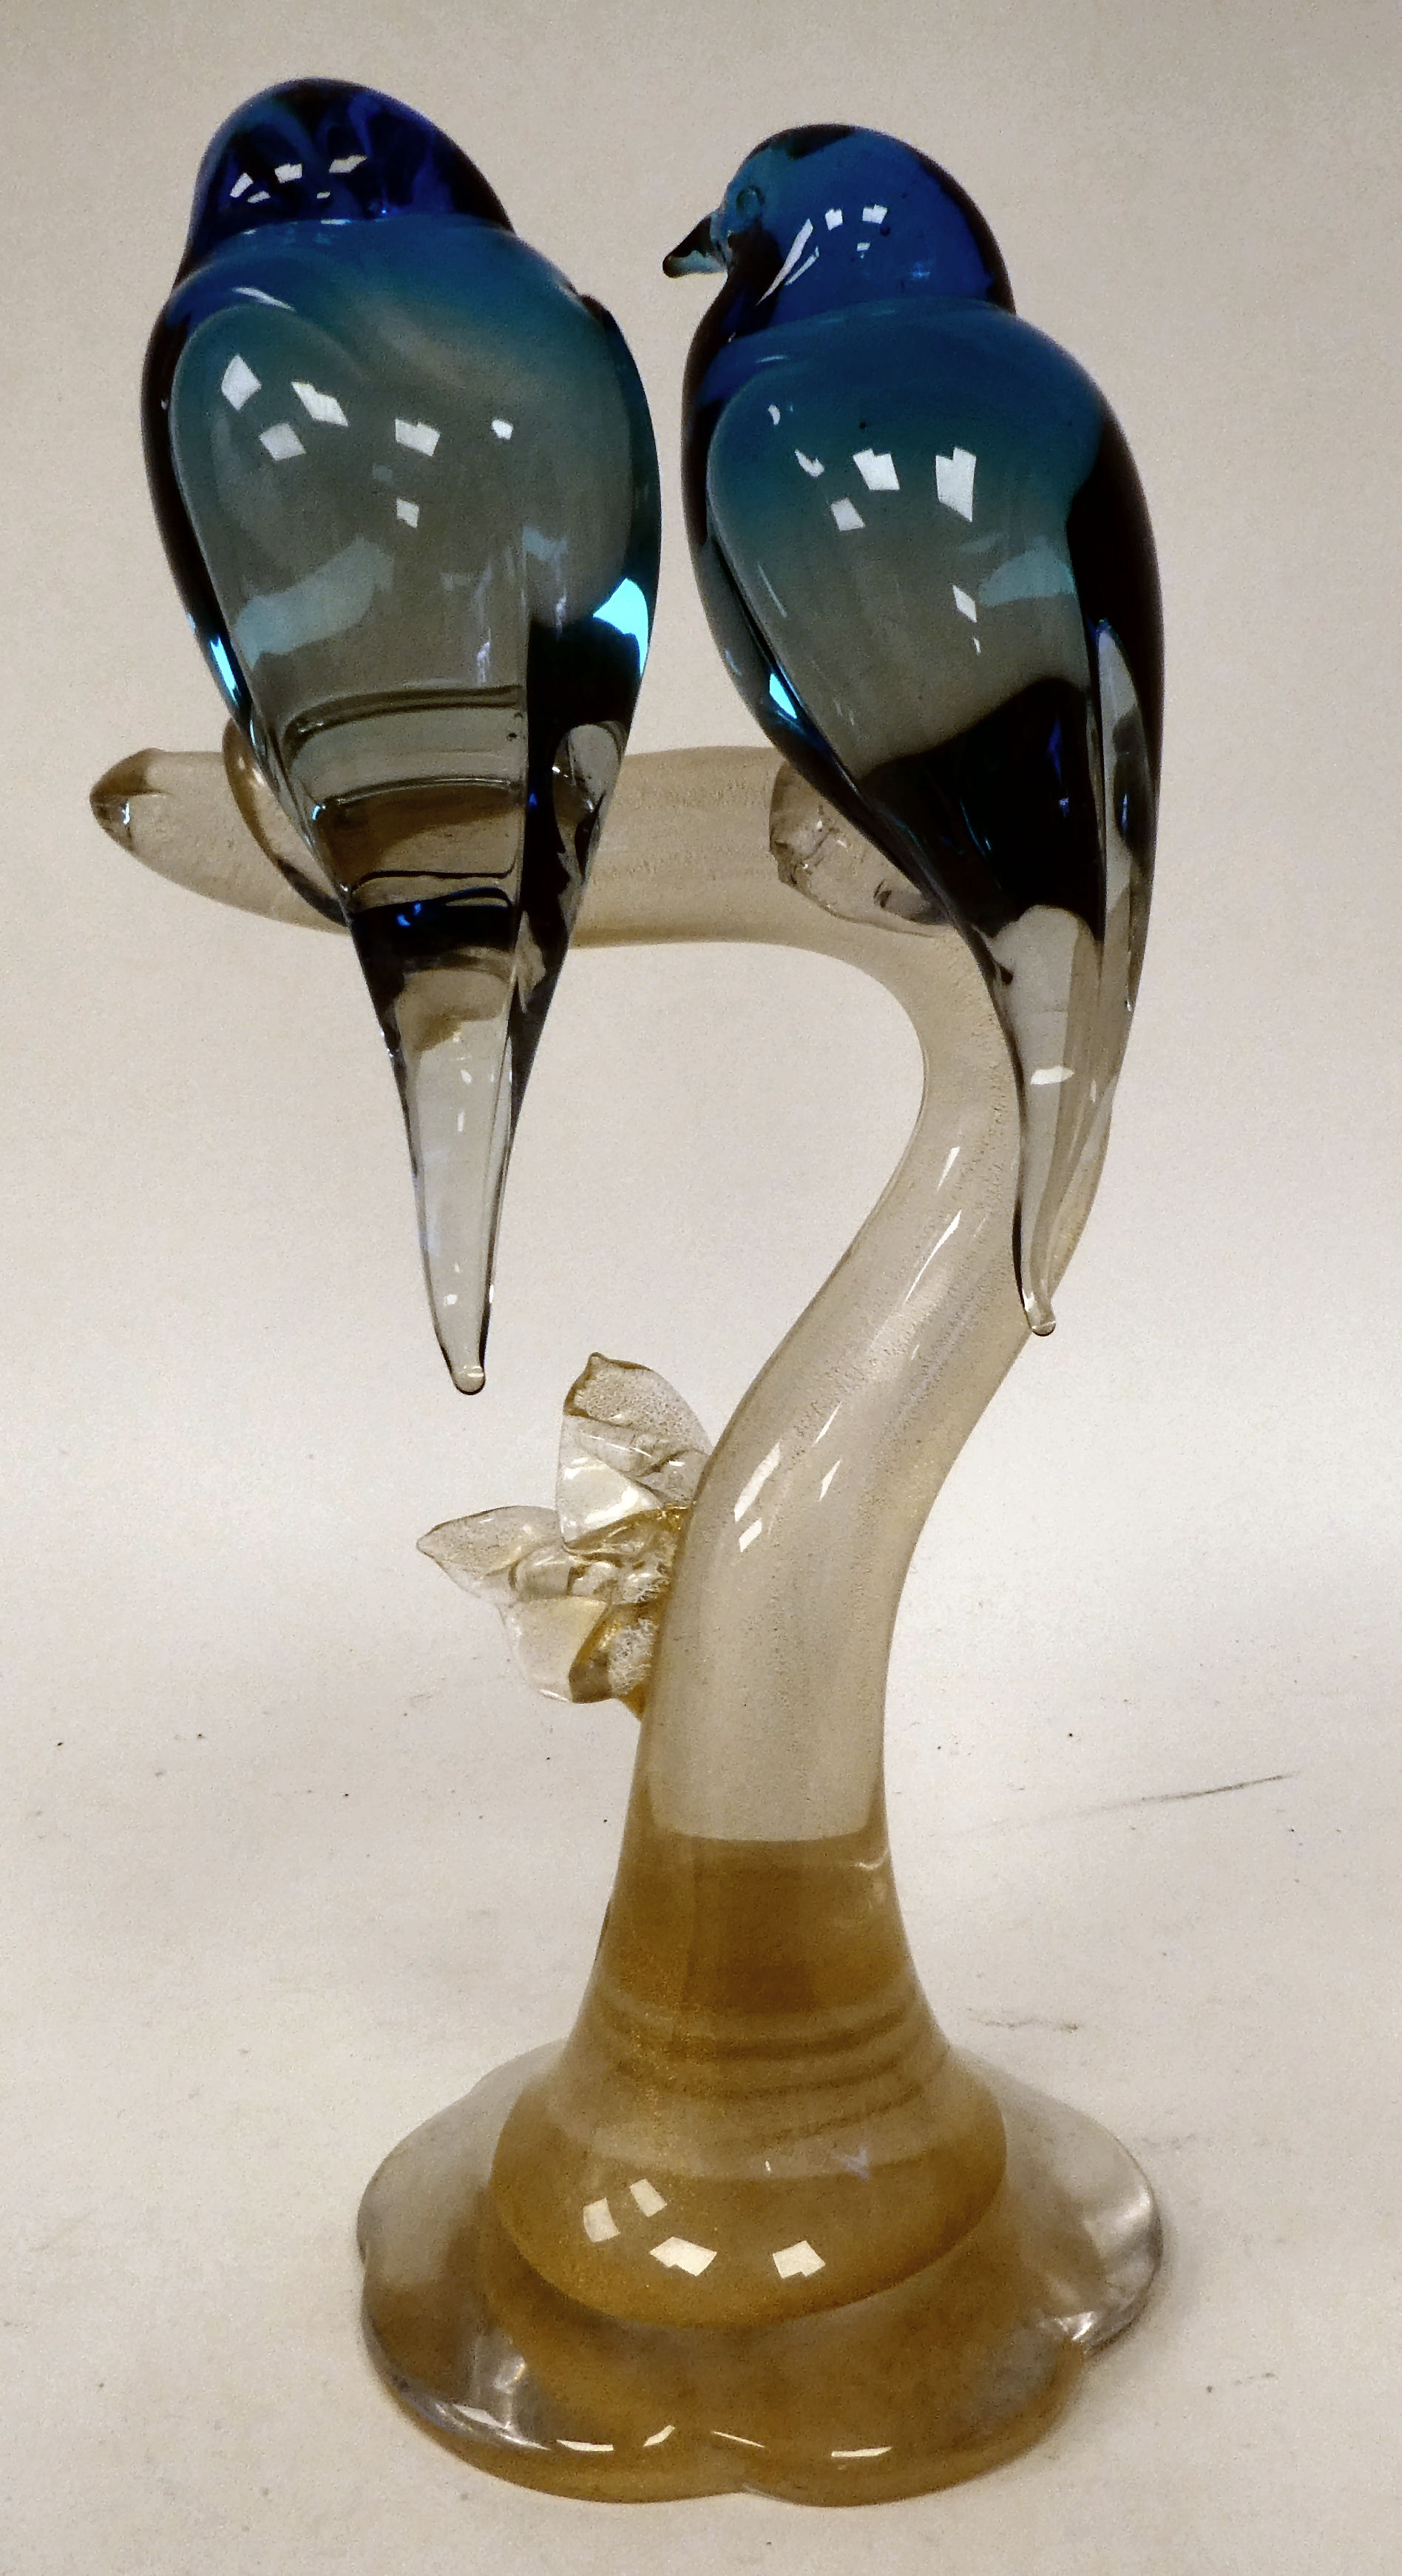 An Murano glass ornament, two birds perched on a branch  12"h - Image 3 of 3